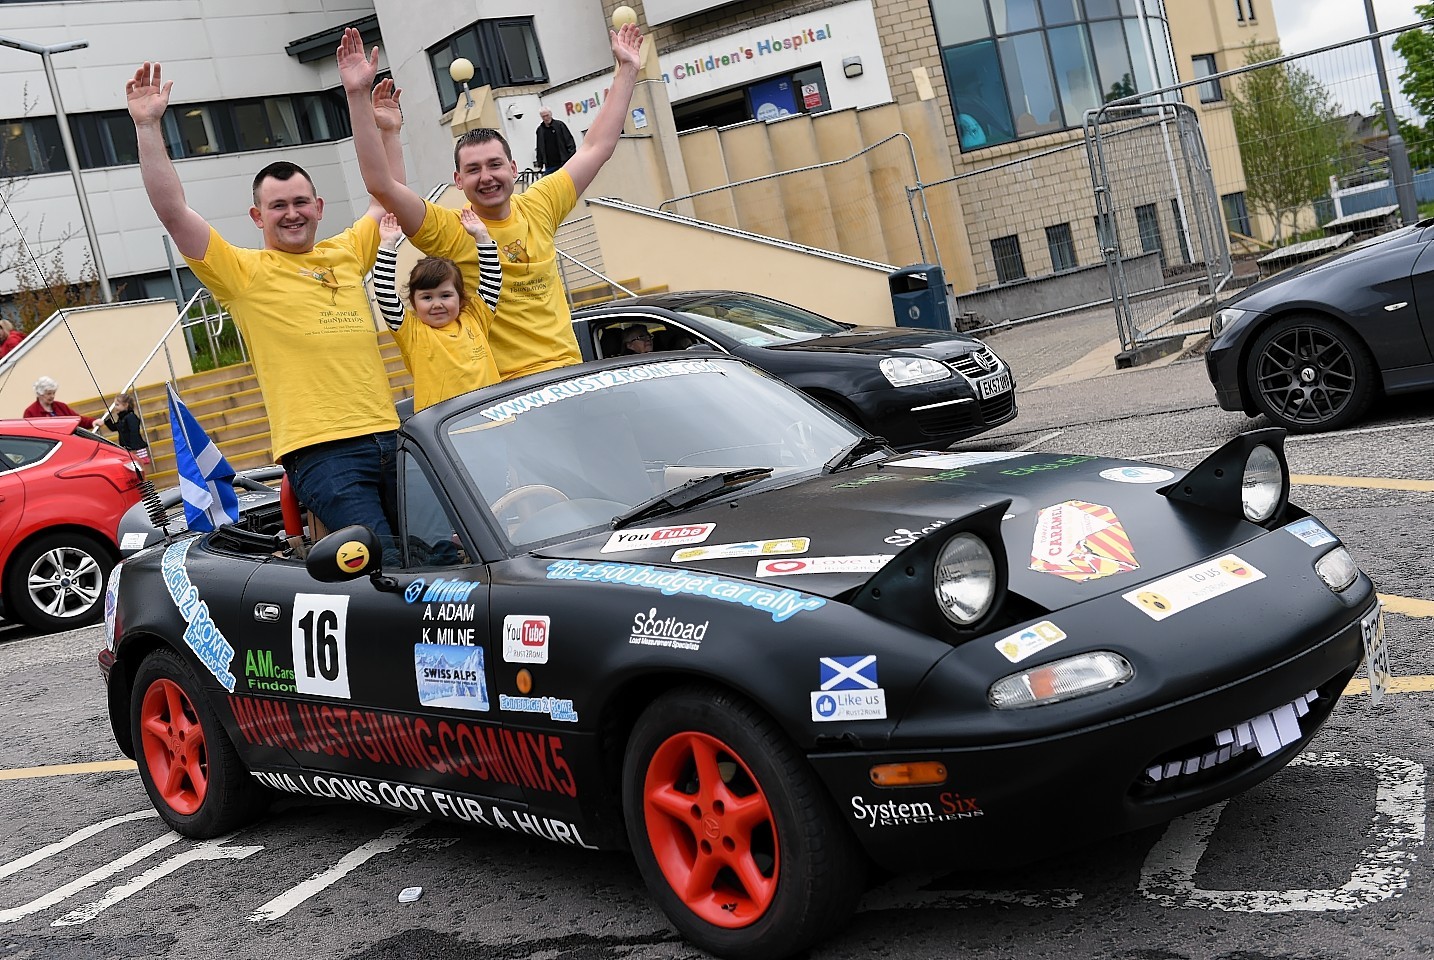 Andy Adam and his friend Kyle Milne are taking on the Rust2Rome rally